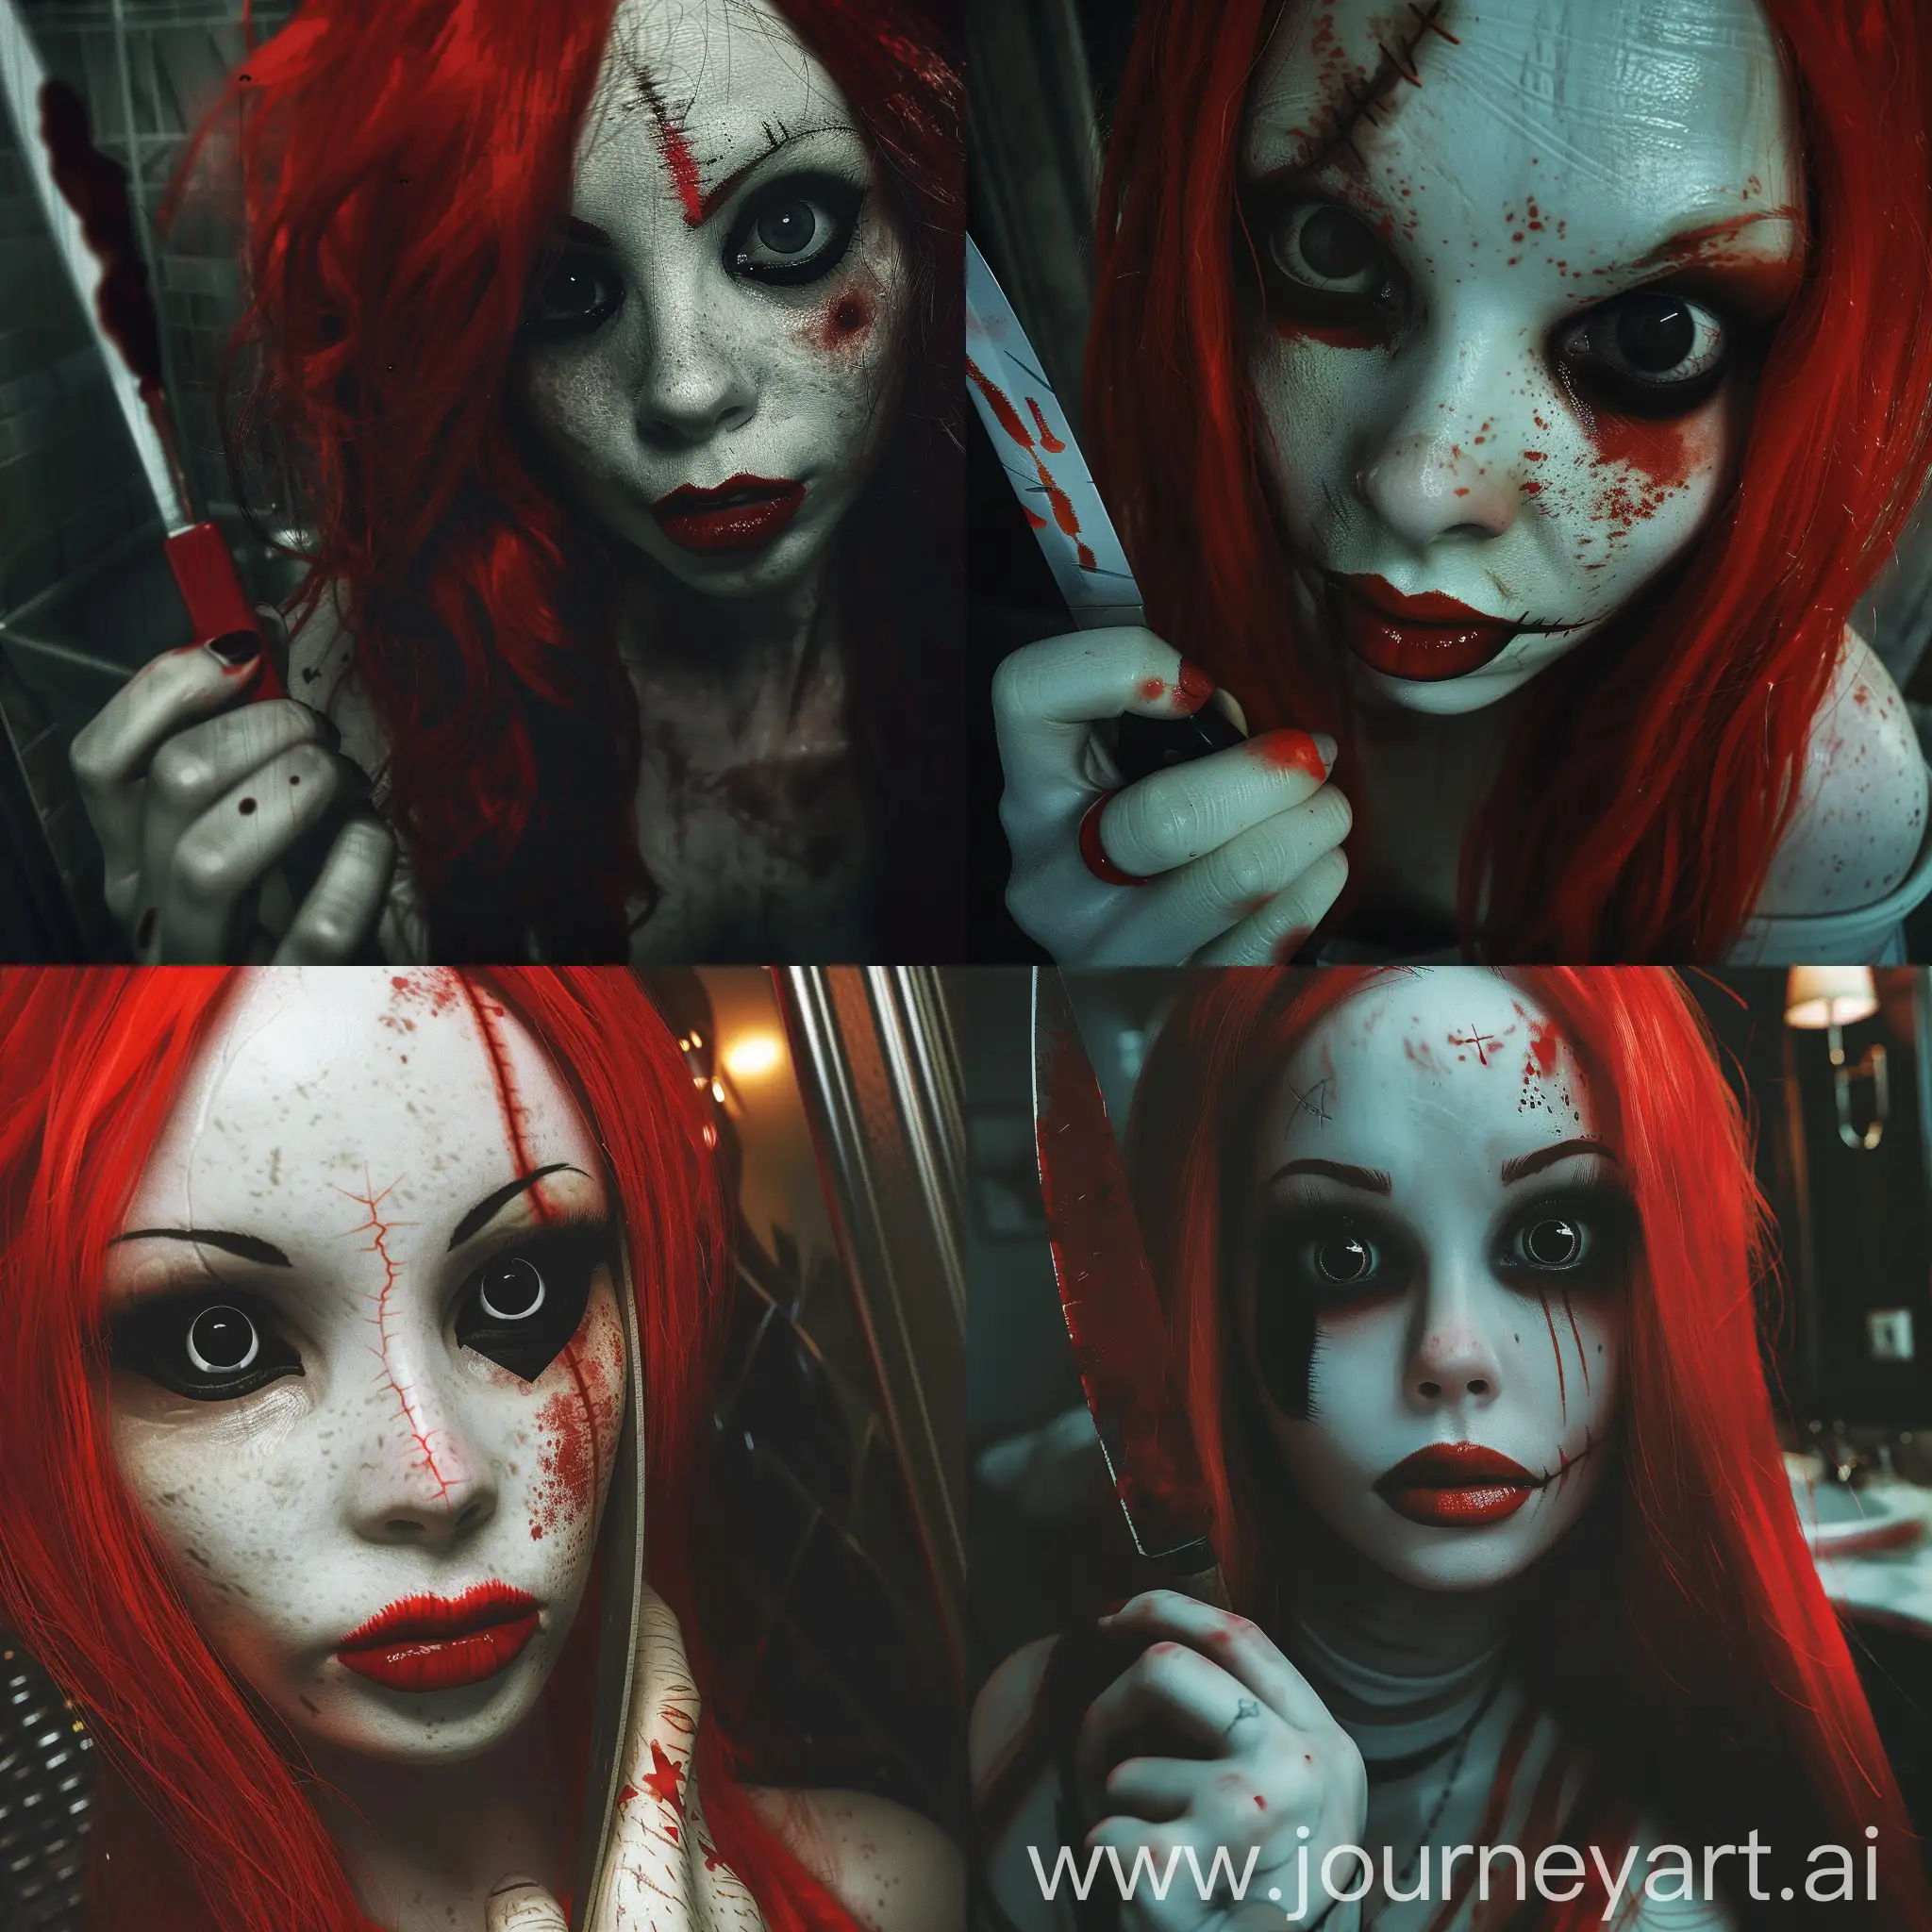 redhair woman with white skin, her eyeballs are big and black, black eyes, red lipstick, she has a bloody knife in her hand, big scar on her forehead, she's at a dark hotel bathroom, cinematic lighting, realistic image